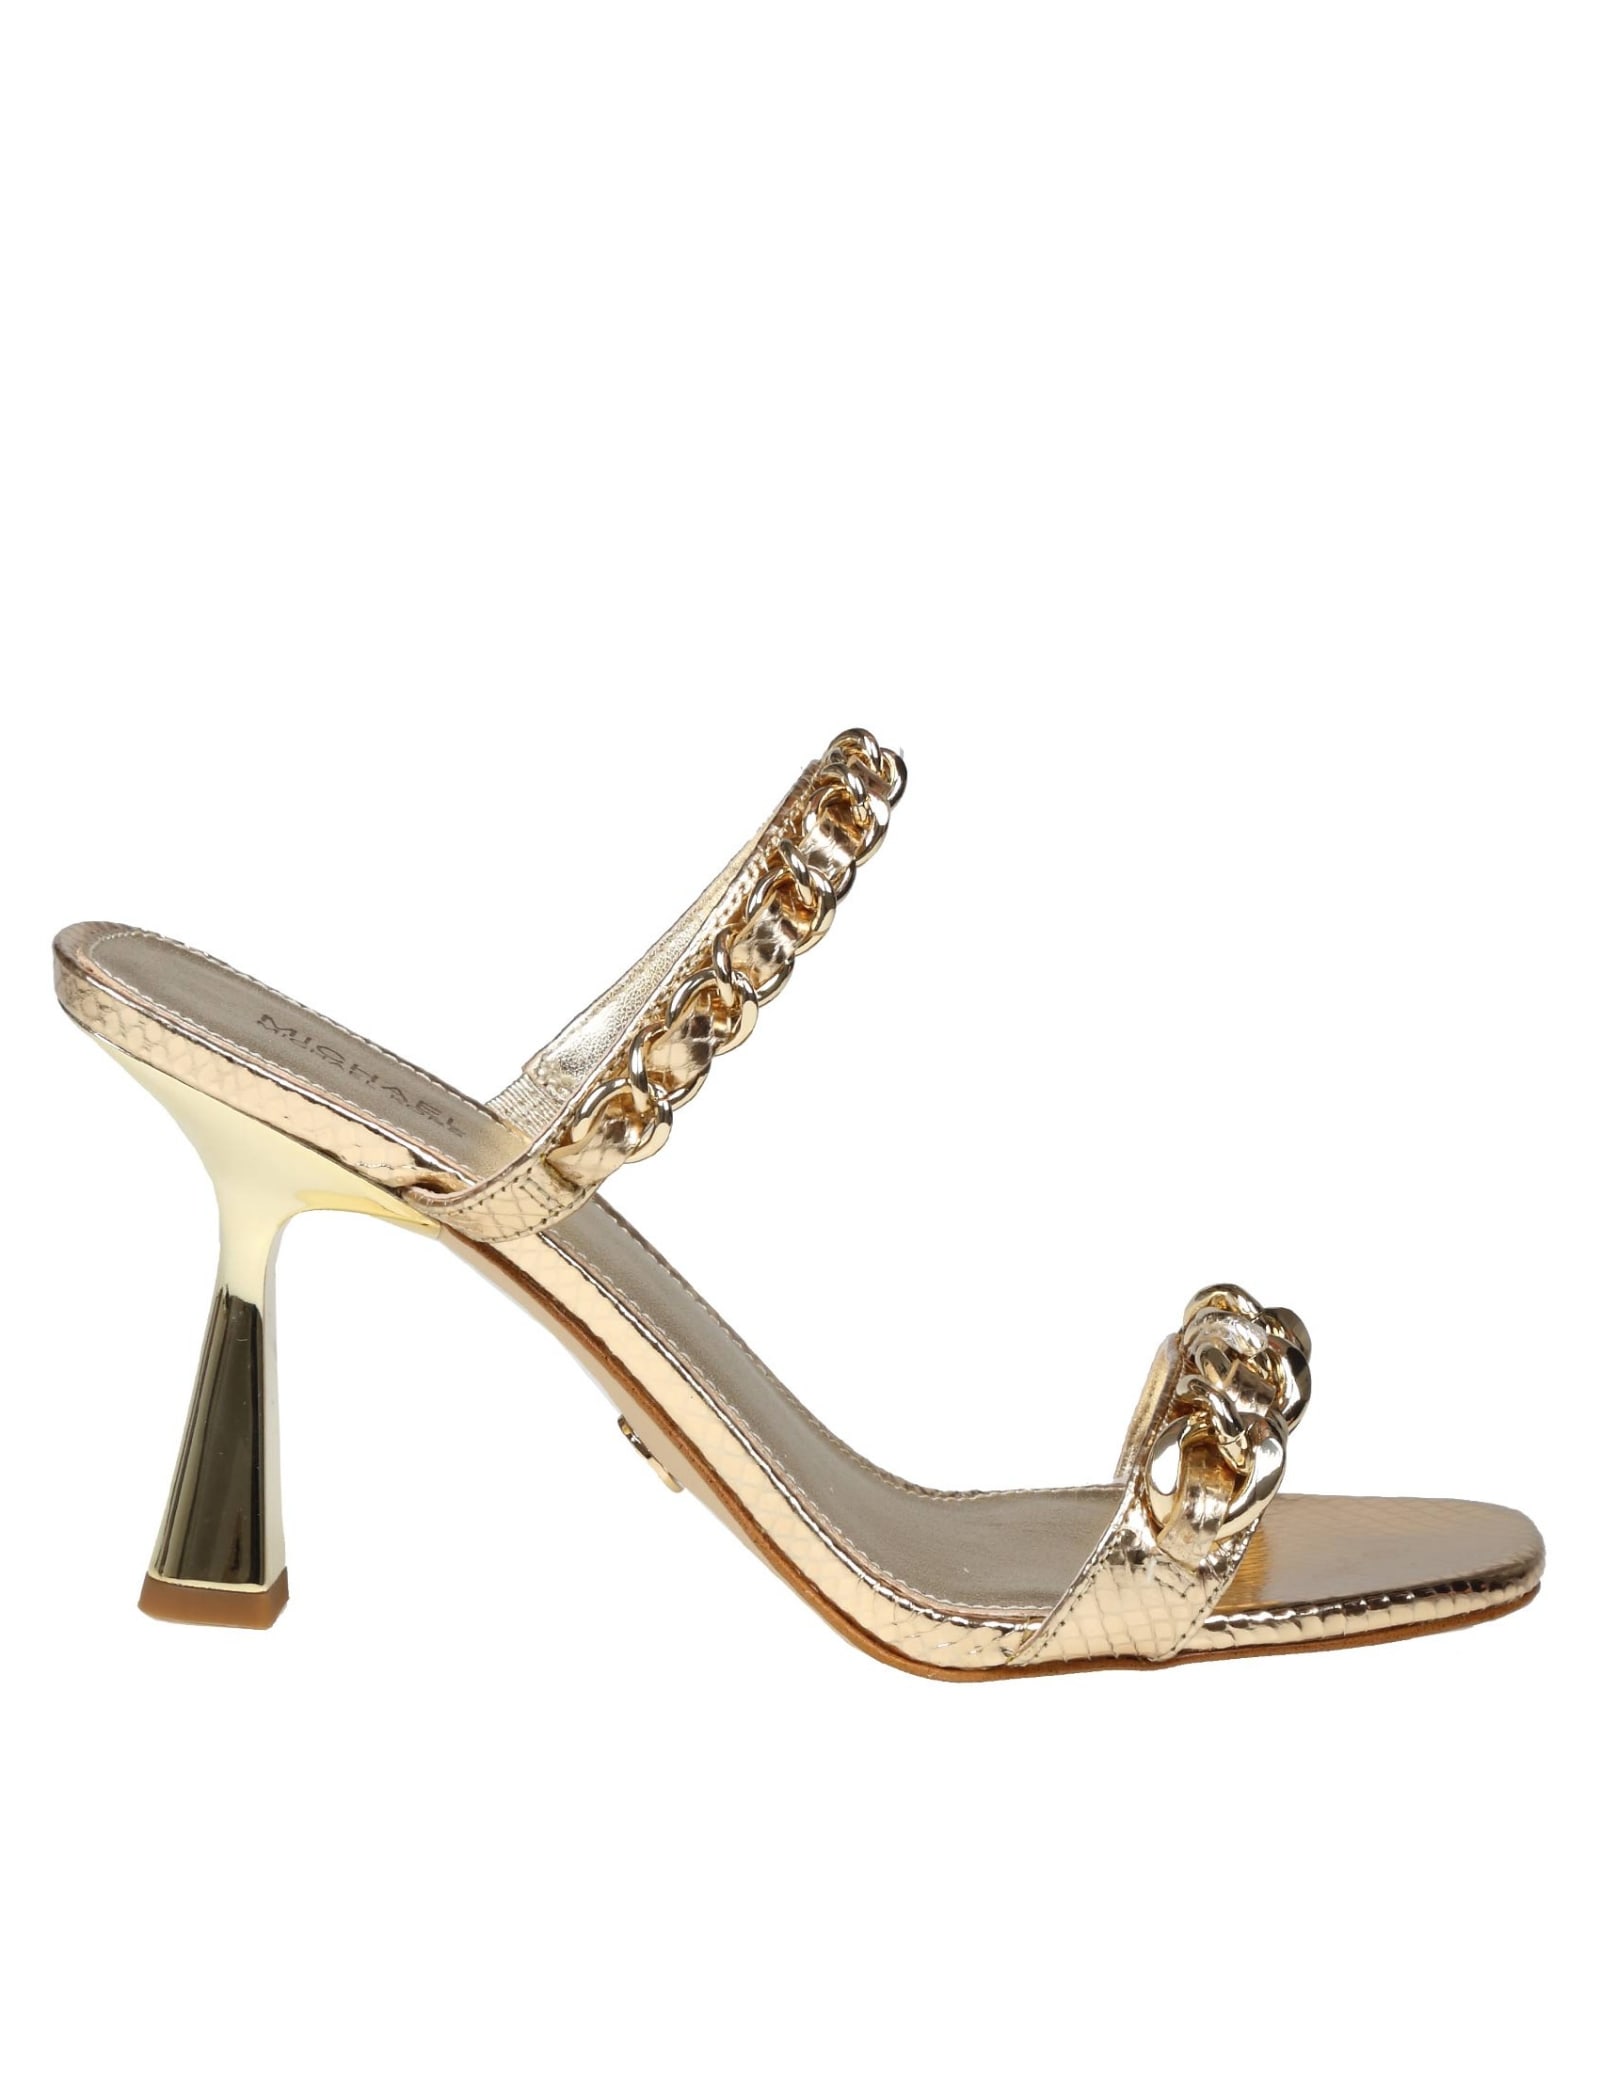 Michael Kors Sandal In Gold Color Leather